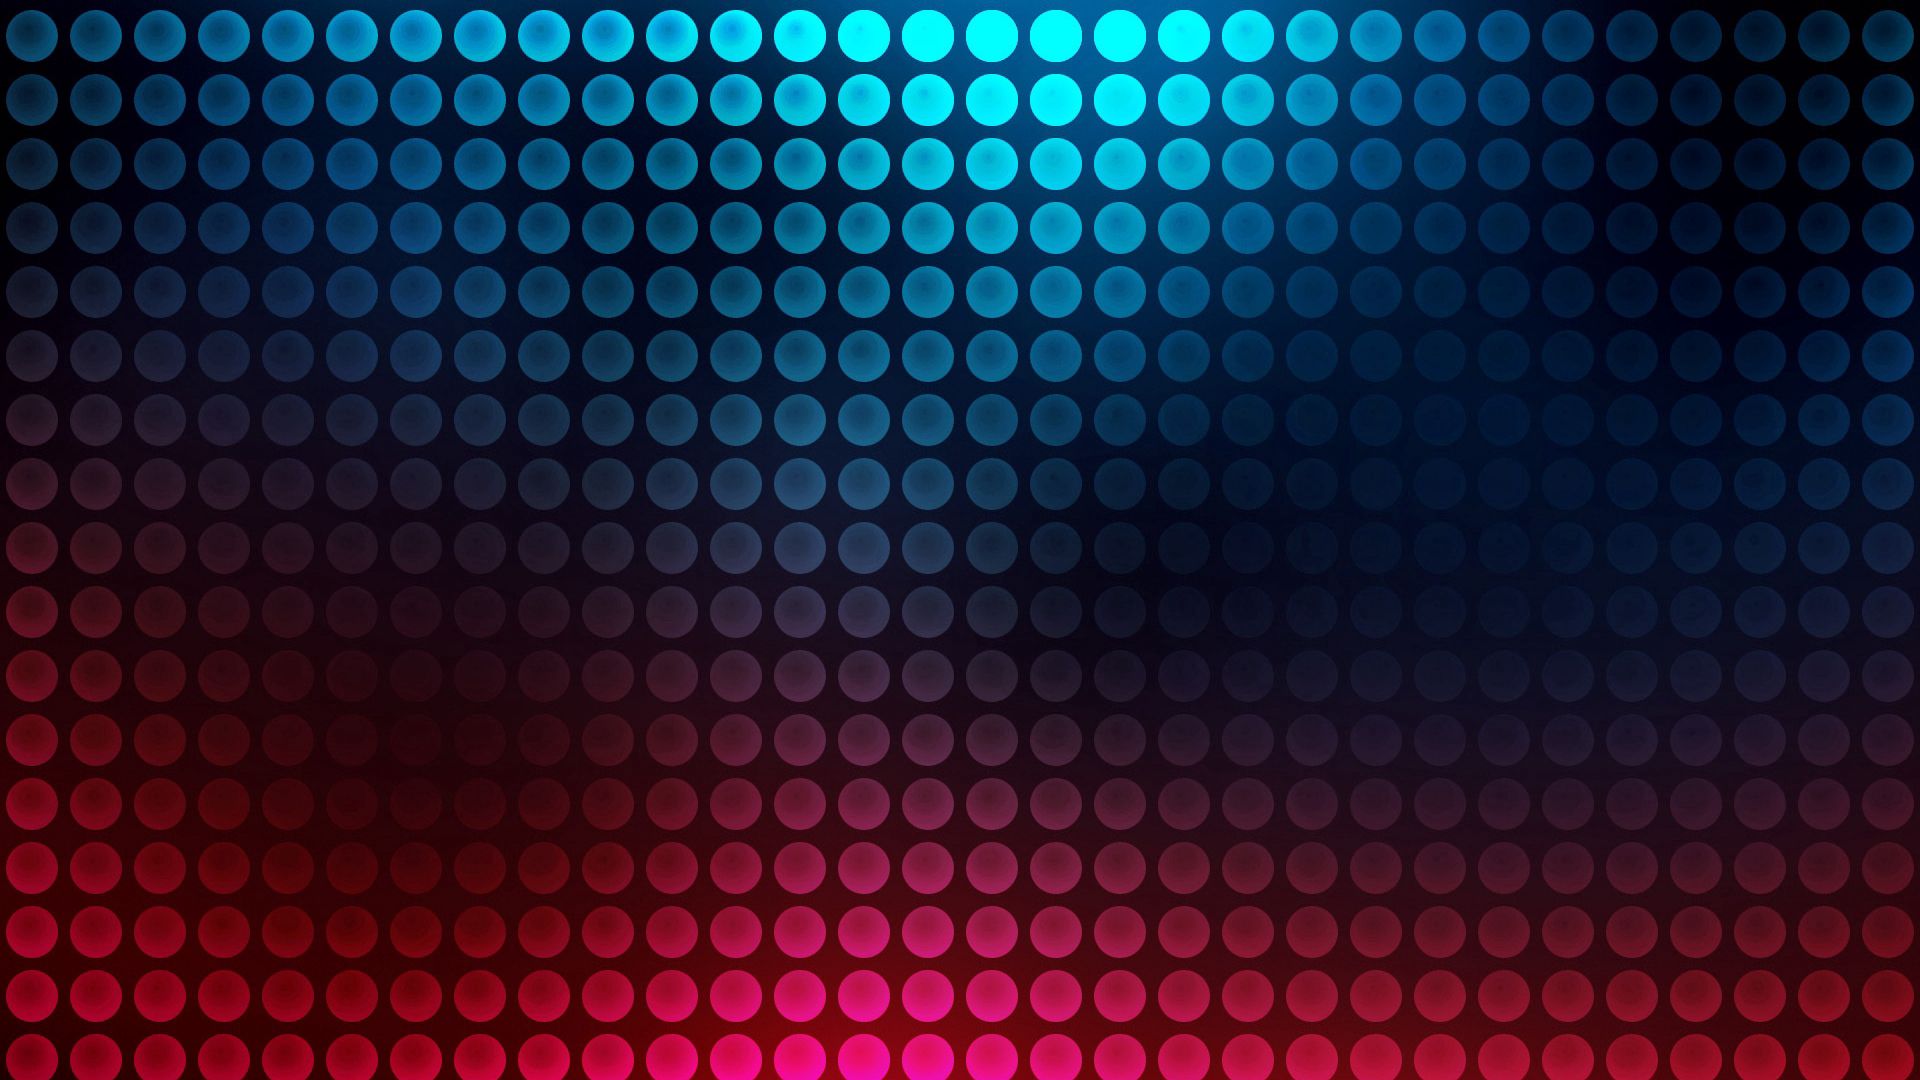 Download wallpaper 1920x1080 color, background, dots, glitter full hd,  hdtv, fhd, 1080p hd background